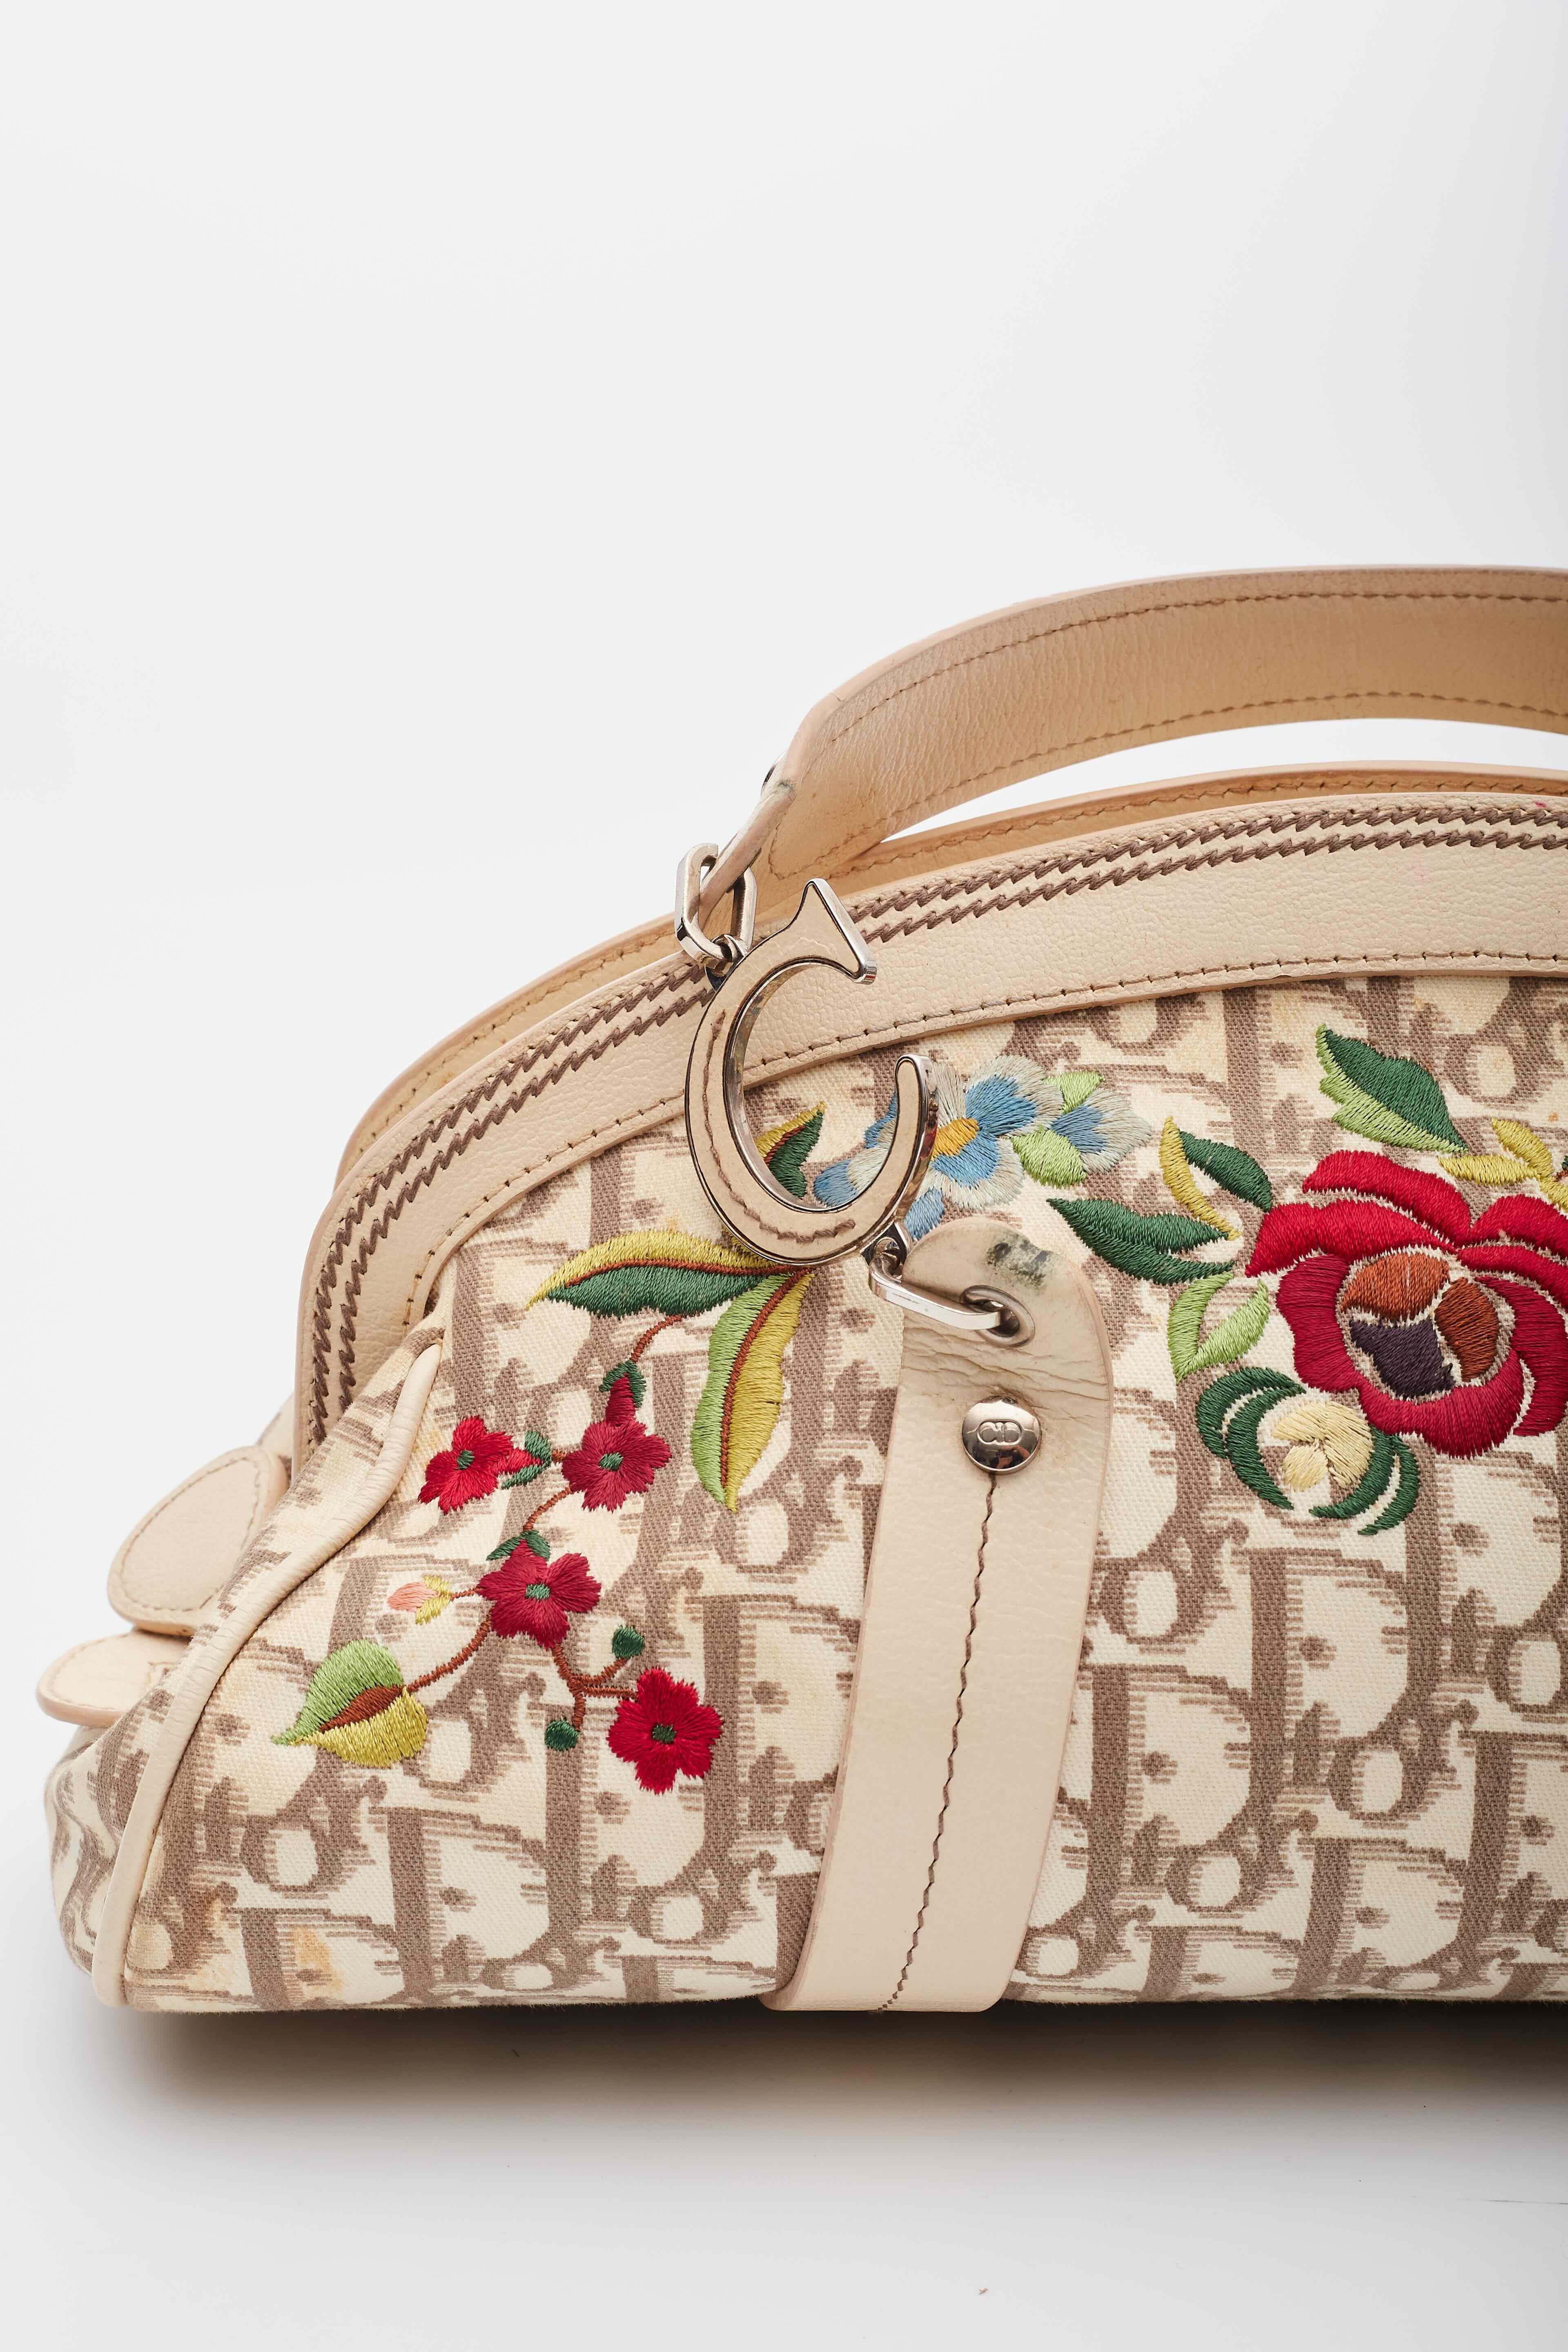 Dior Trotter Diorissimo Flowers Bowling Bag For Sale 2